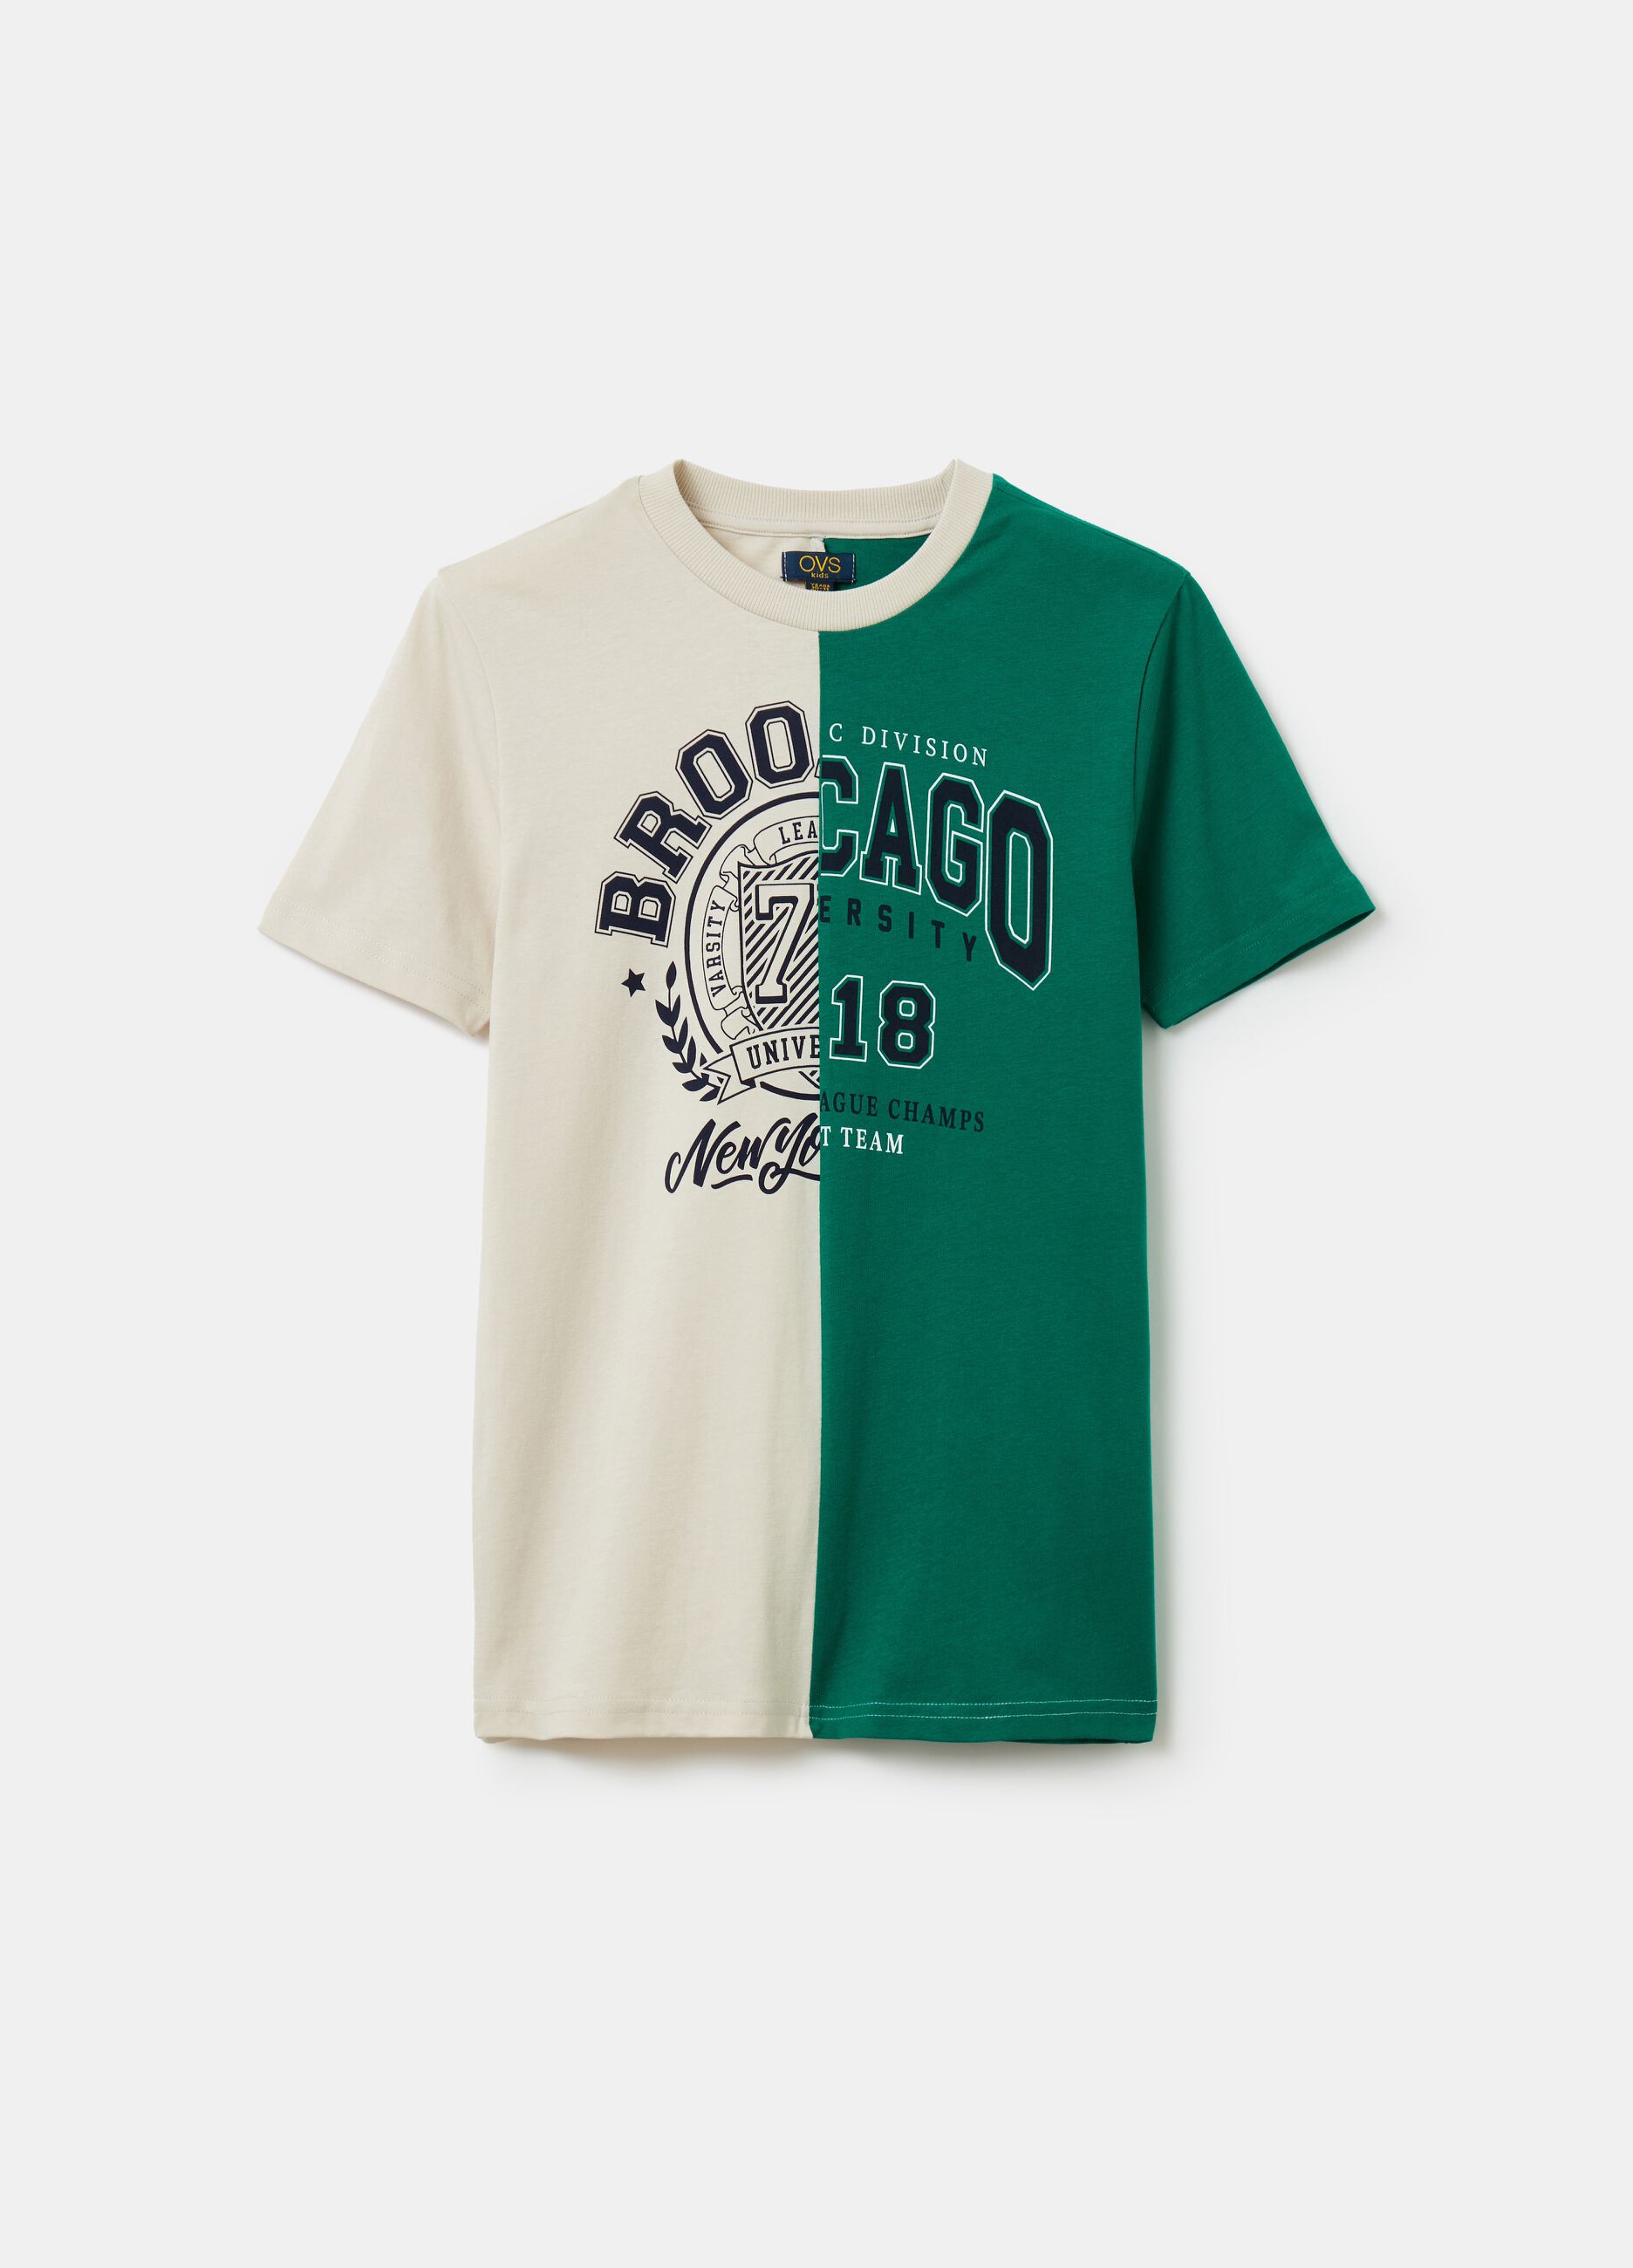 Two-tone T-shirt with printed lettering.